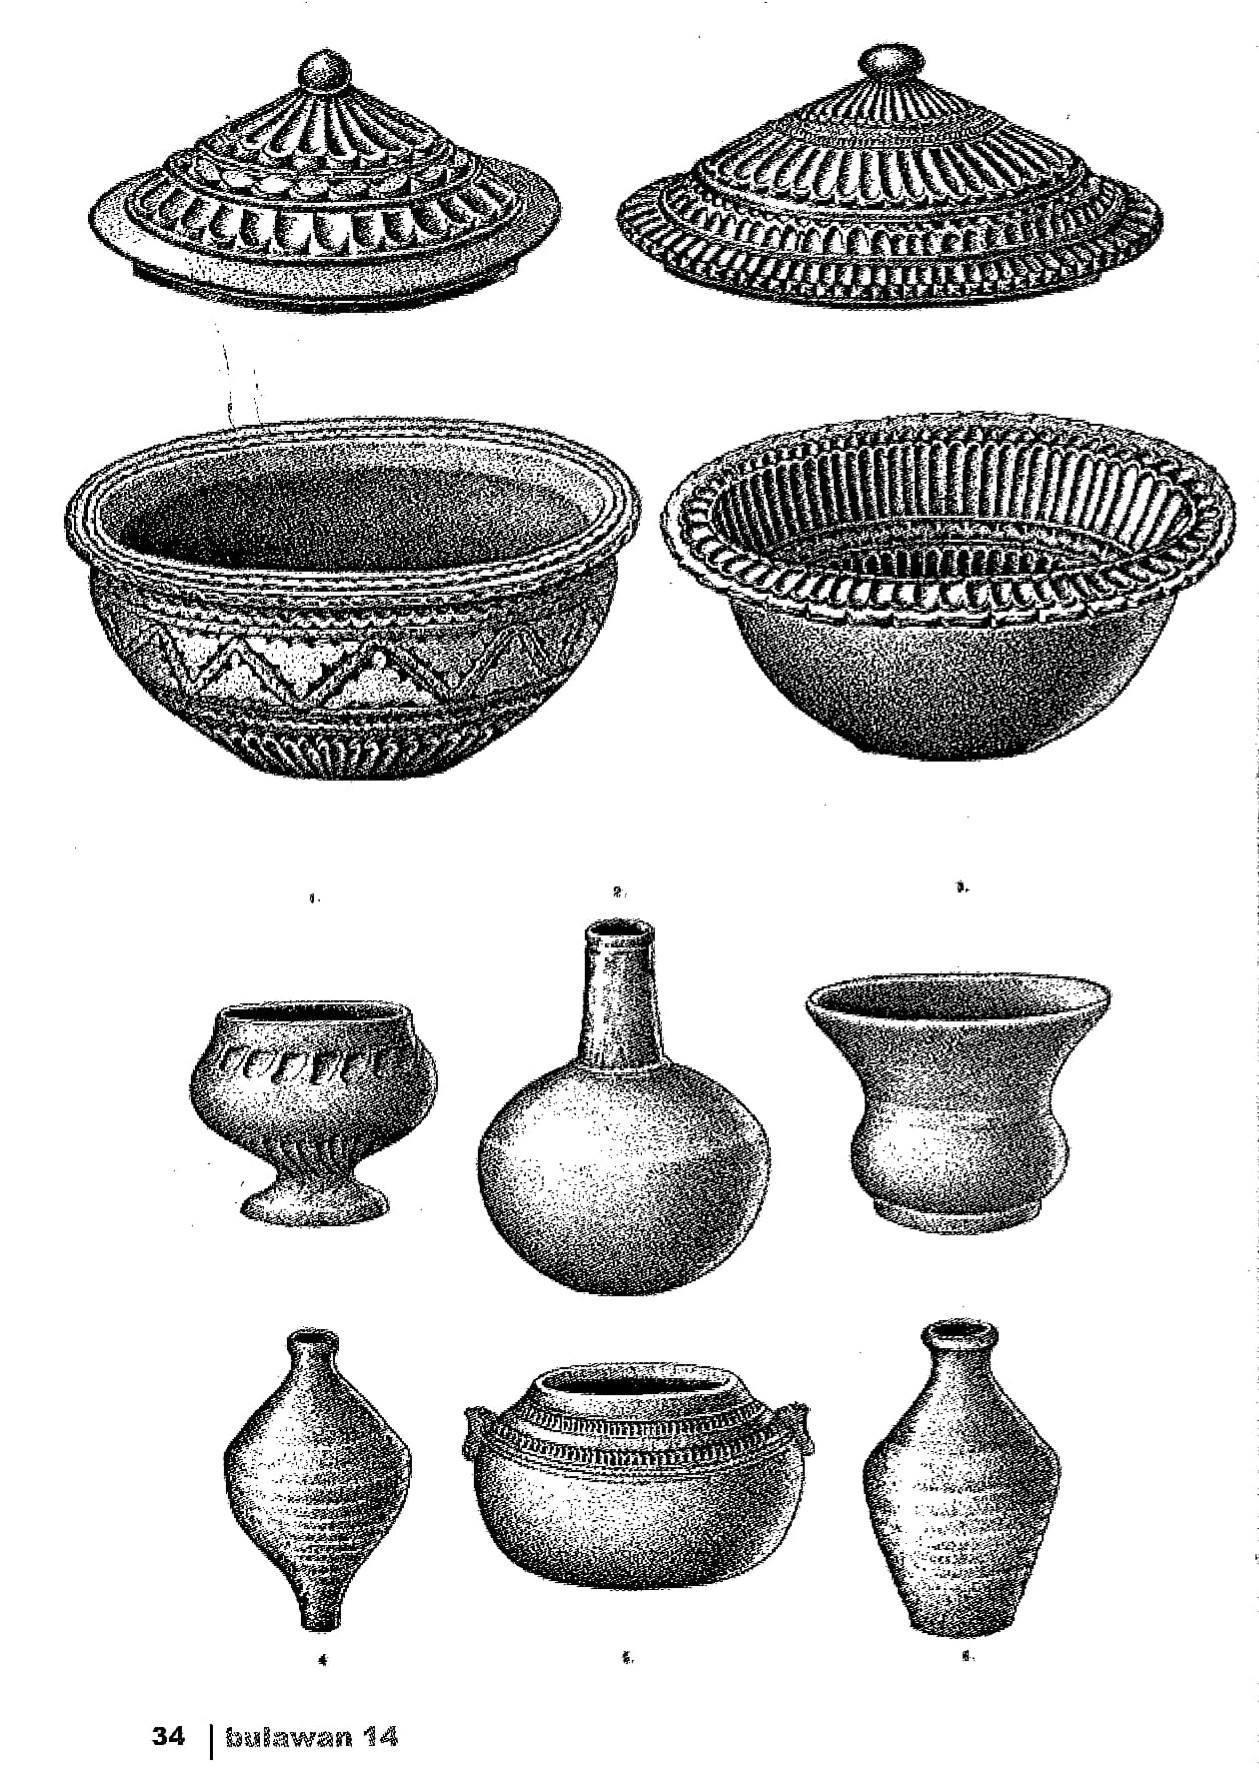 Manila Ware Pottery - The Ceramic Heritage of the Philippines